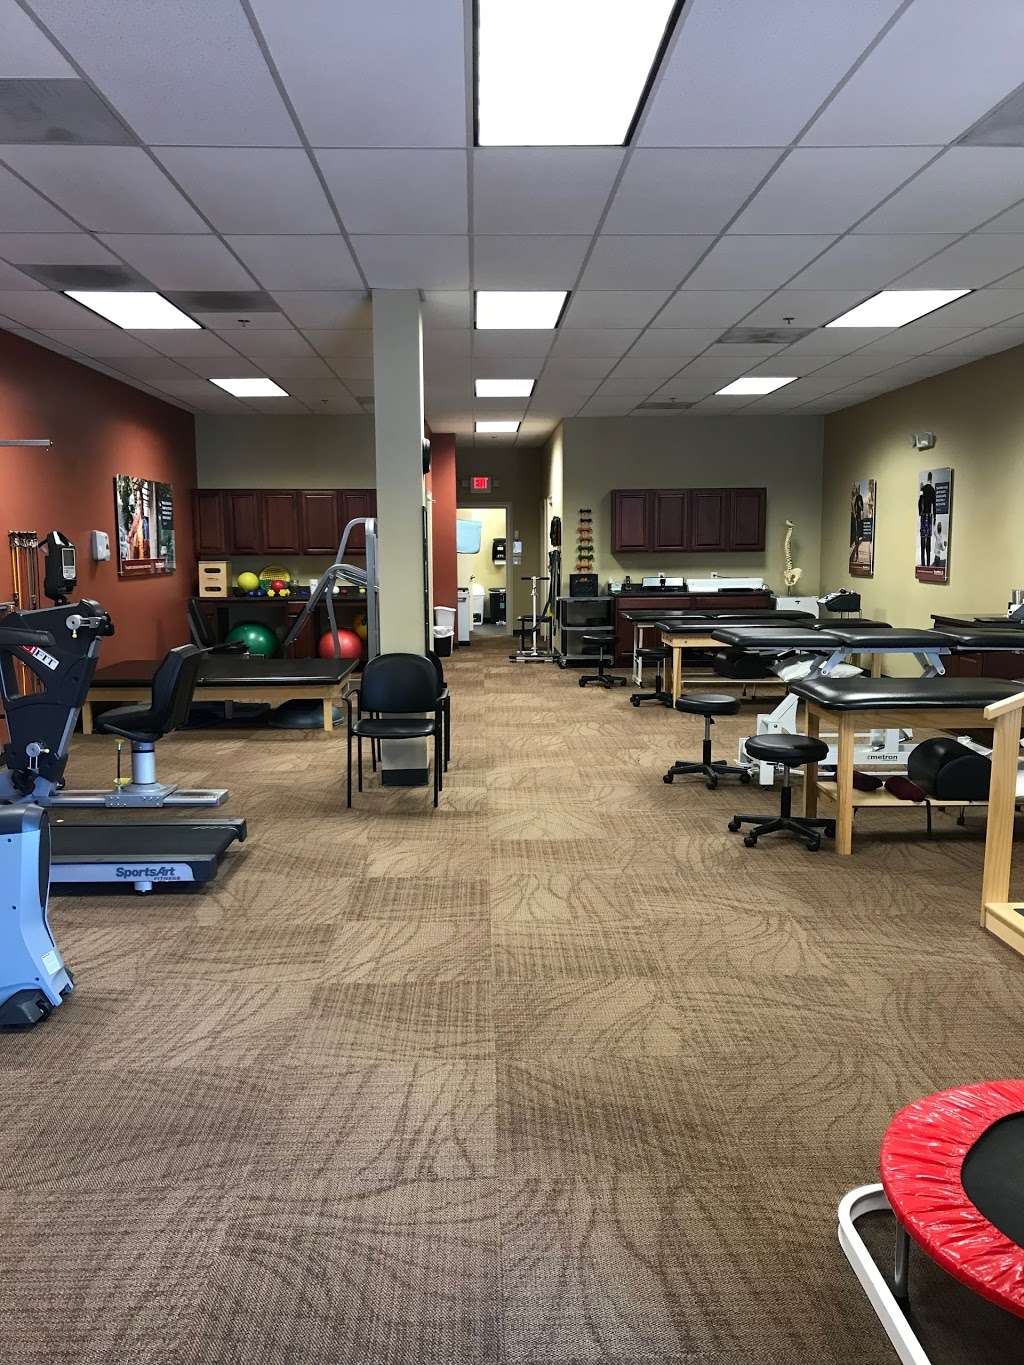 BenchMark Physical Therapy (Fort Mill) | 1135 Stonecrest Blvd, Tega Cay, SC 29708, USA | Phone: (803) 547-9940